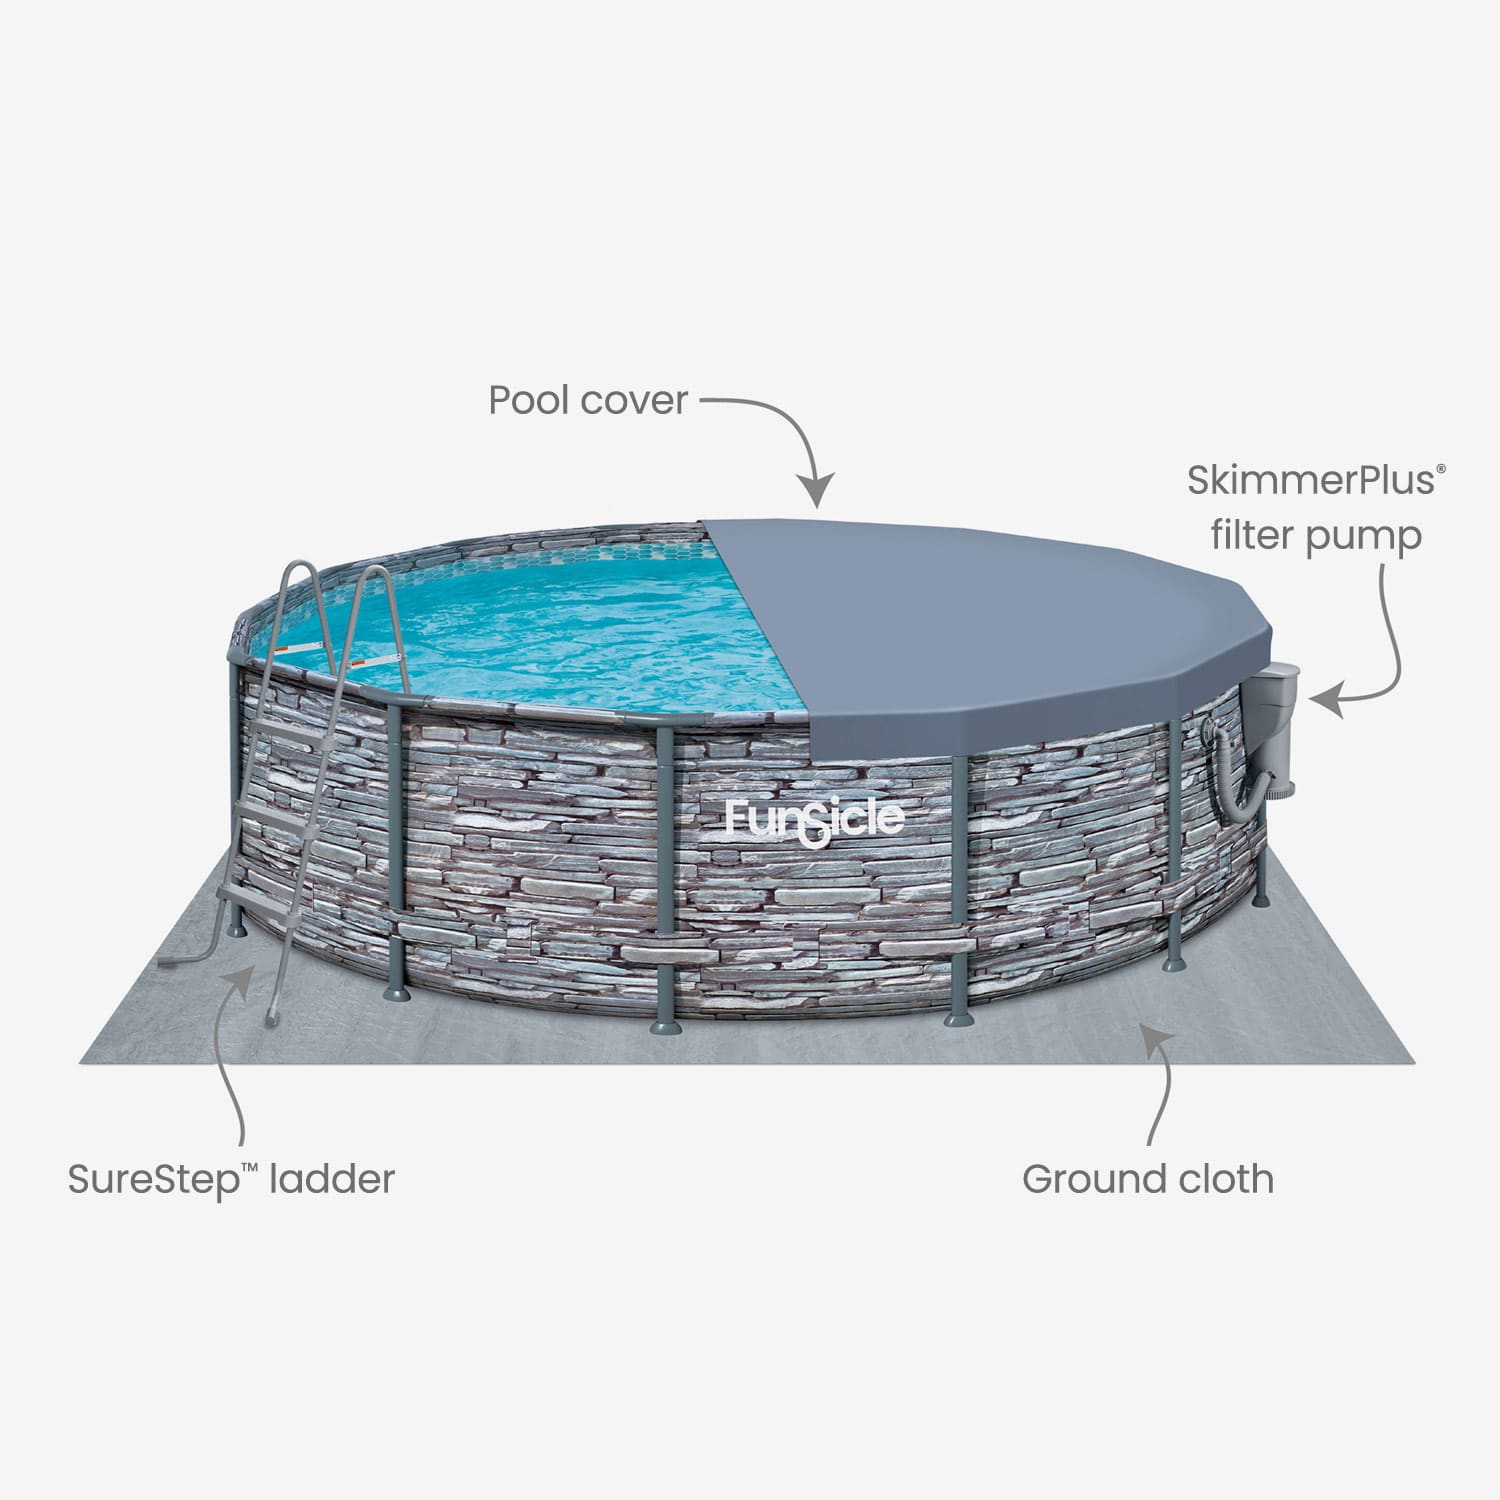 Funsicle 14 ft Oasis Designer Pool - Stone Slate with callout features